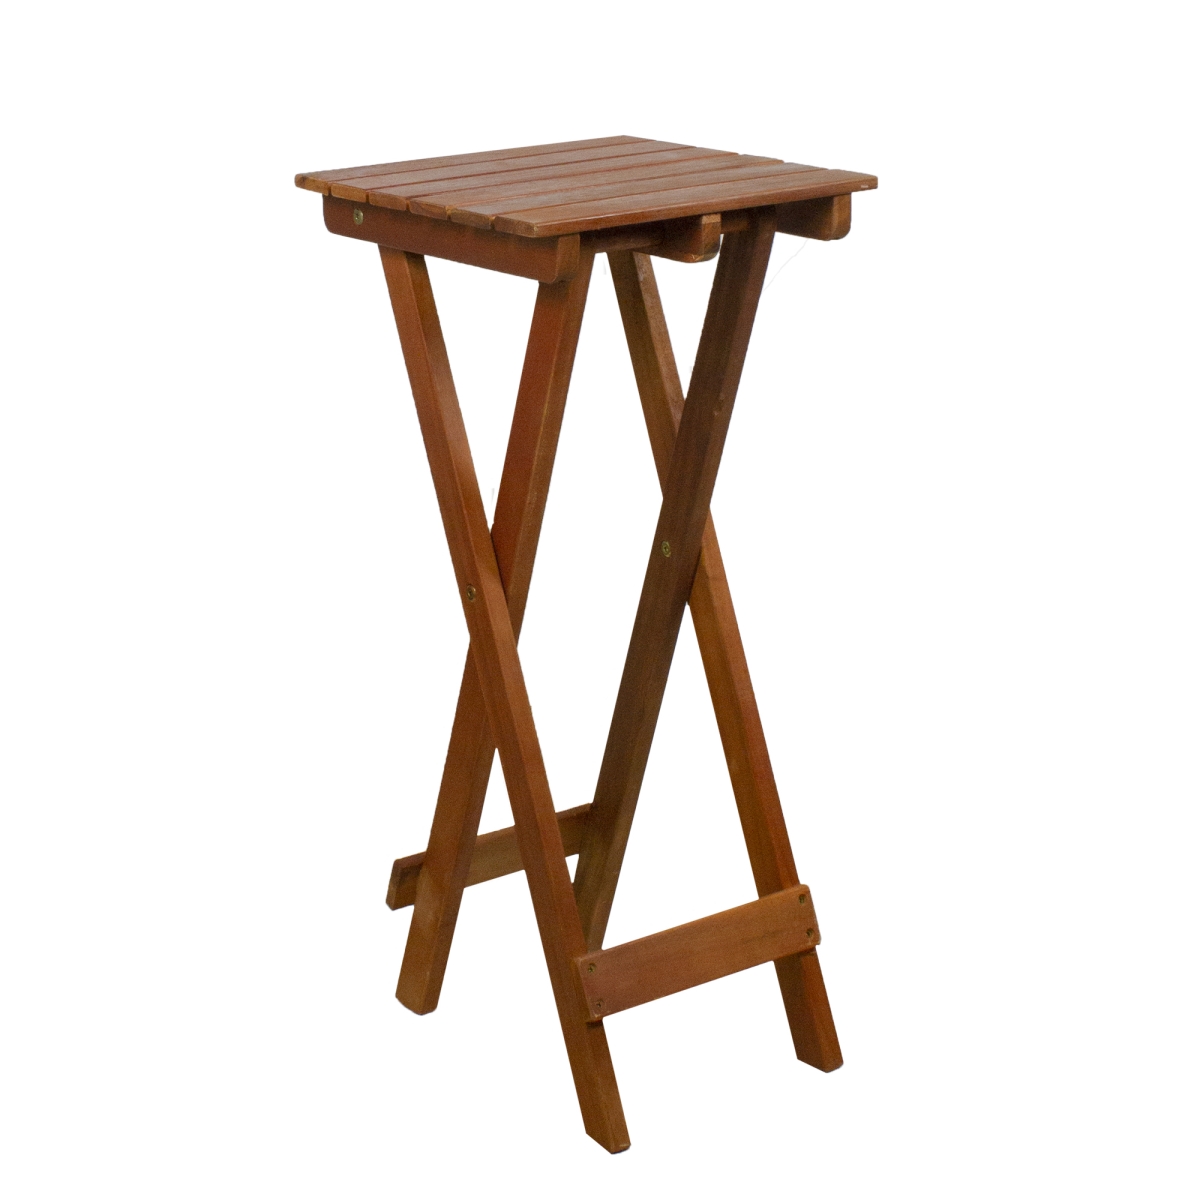 34219527 26 In. Acacia Wood Outdoor Folding Accent Table, Light Brown